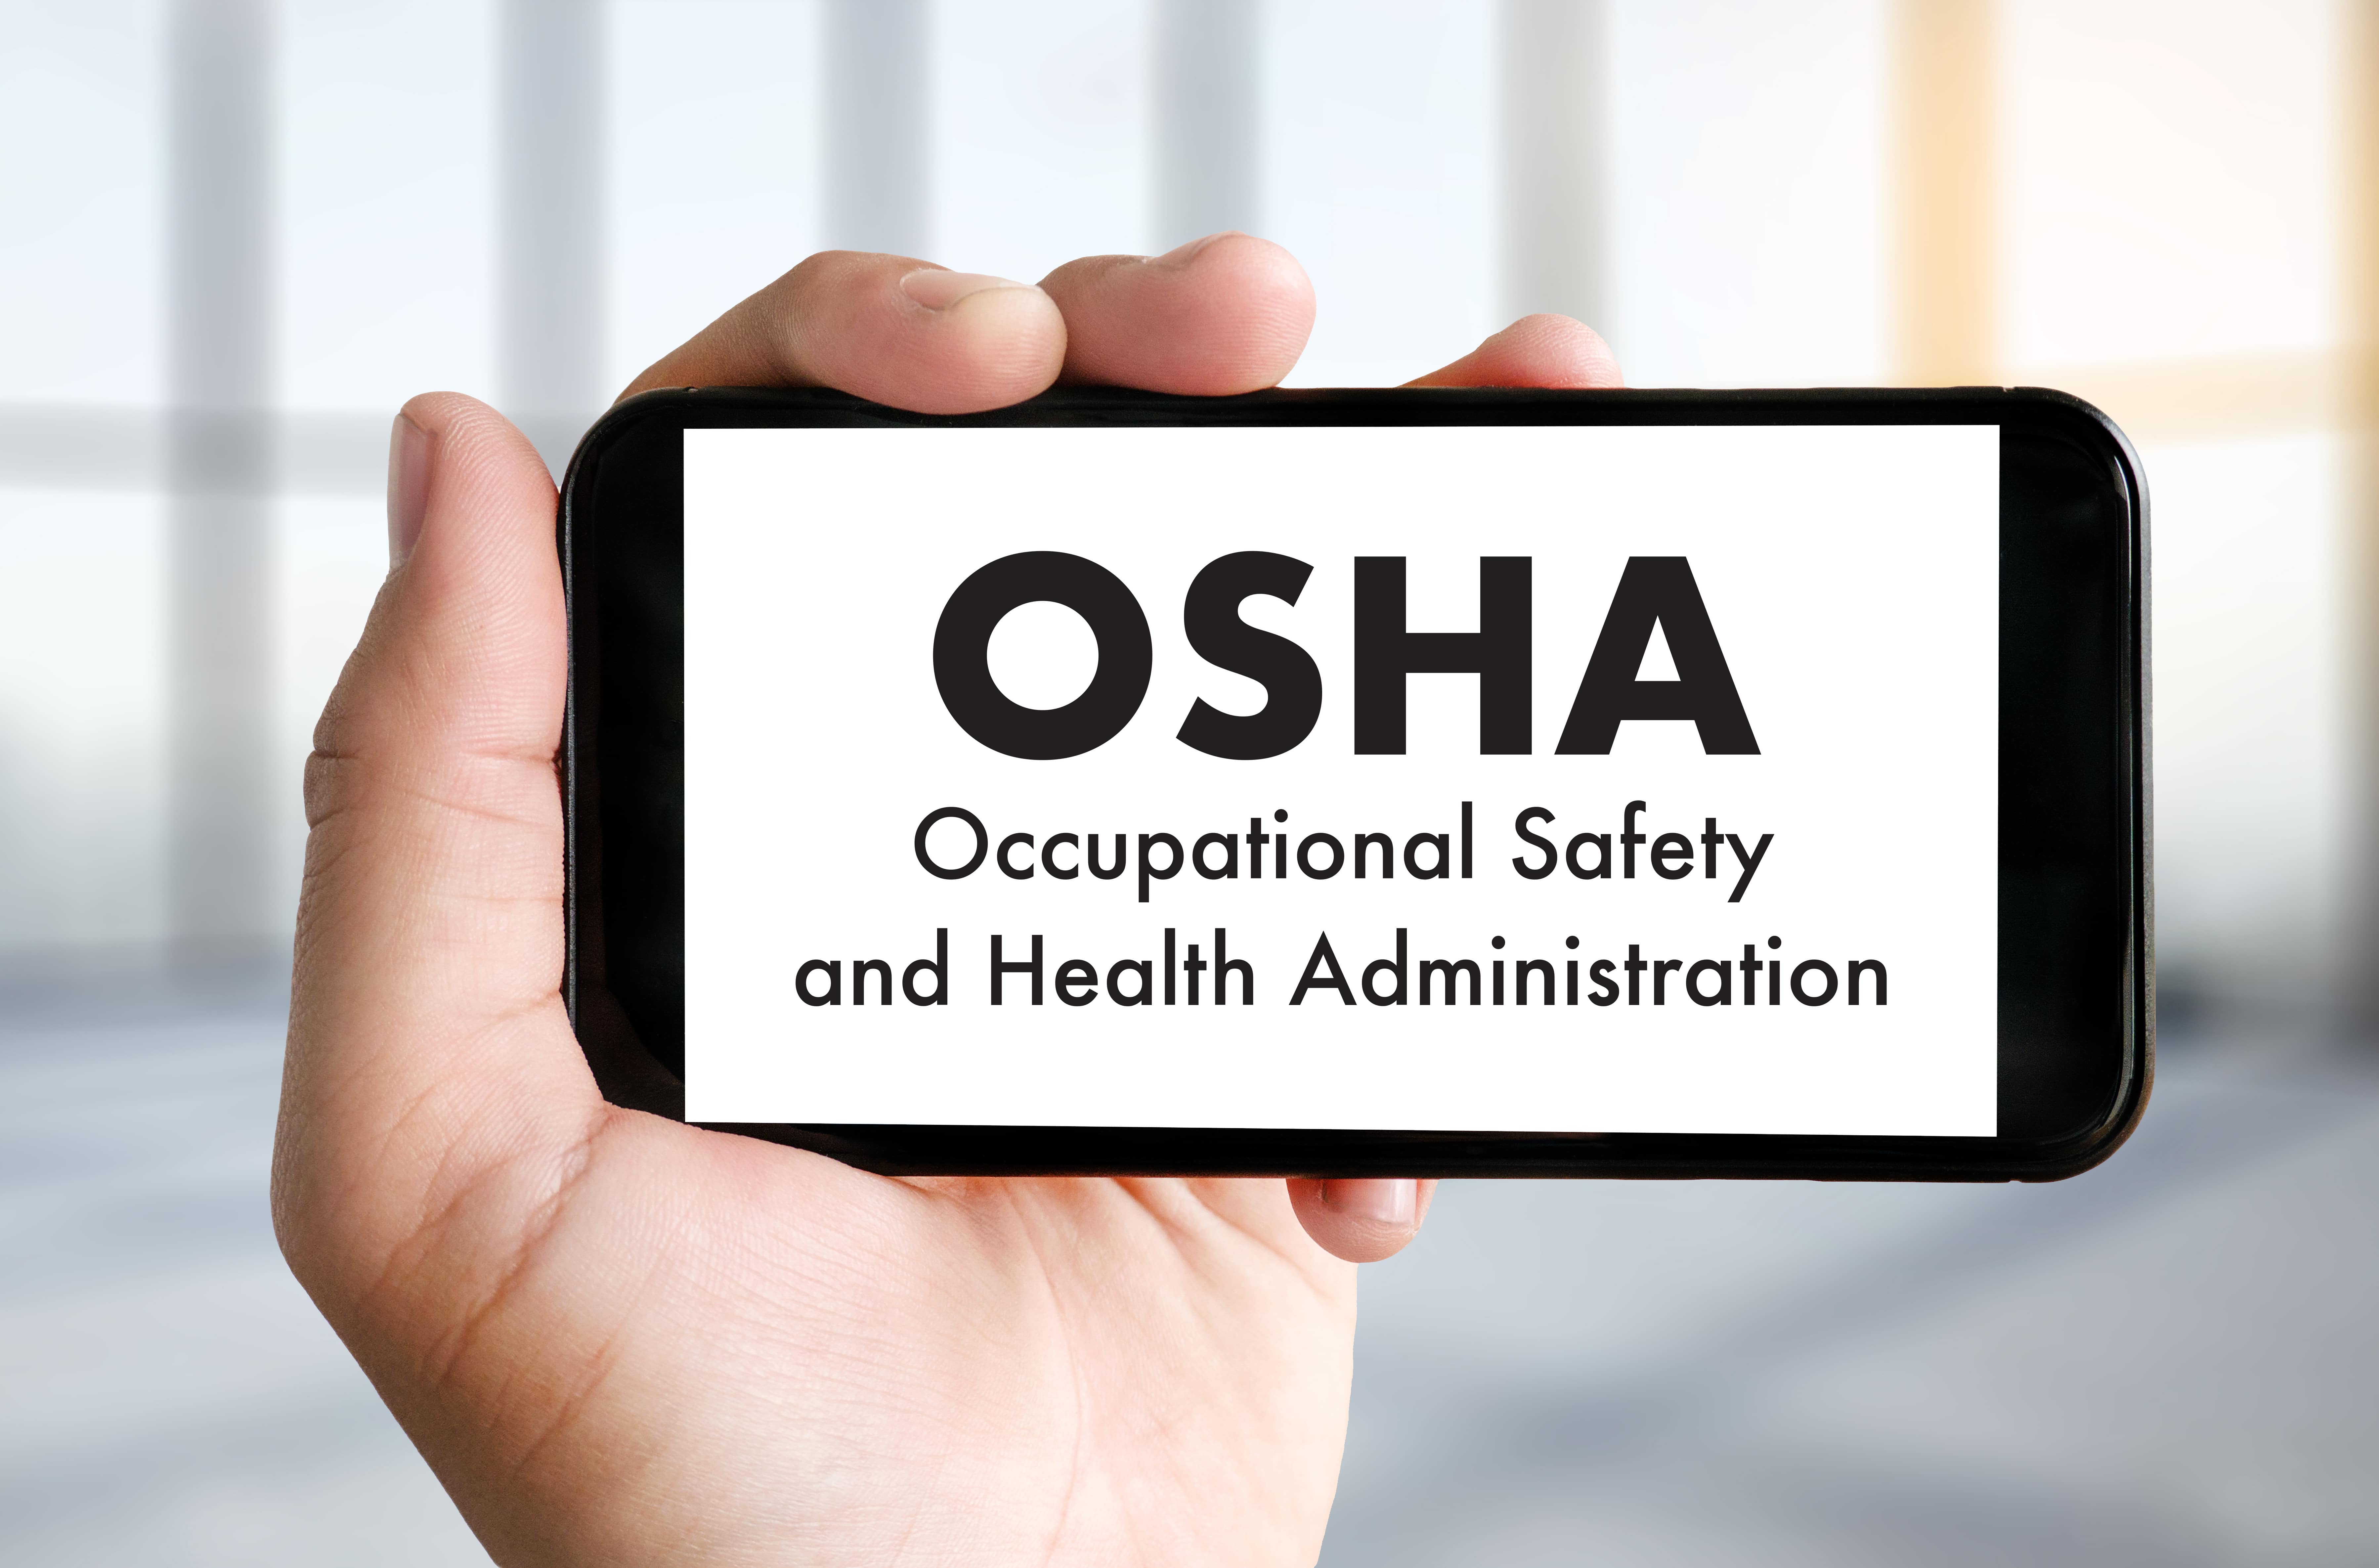 OSHA (Occupational Safety and Health Administration.